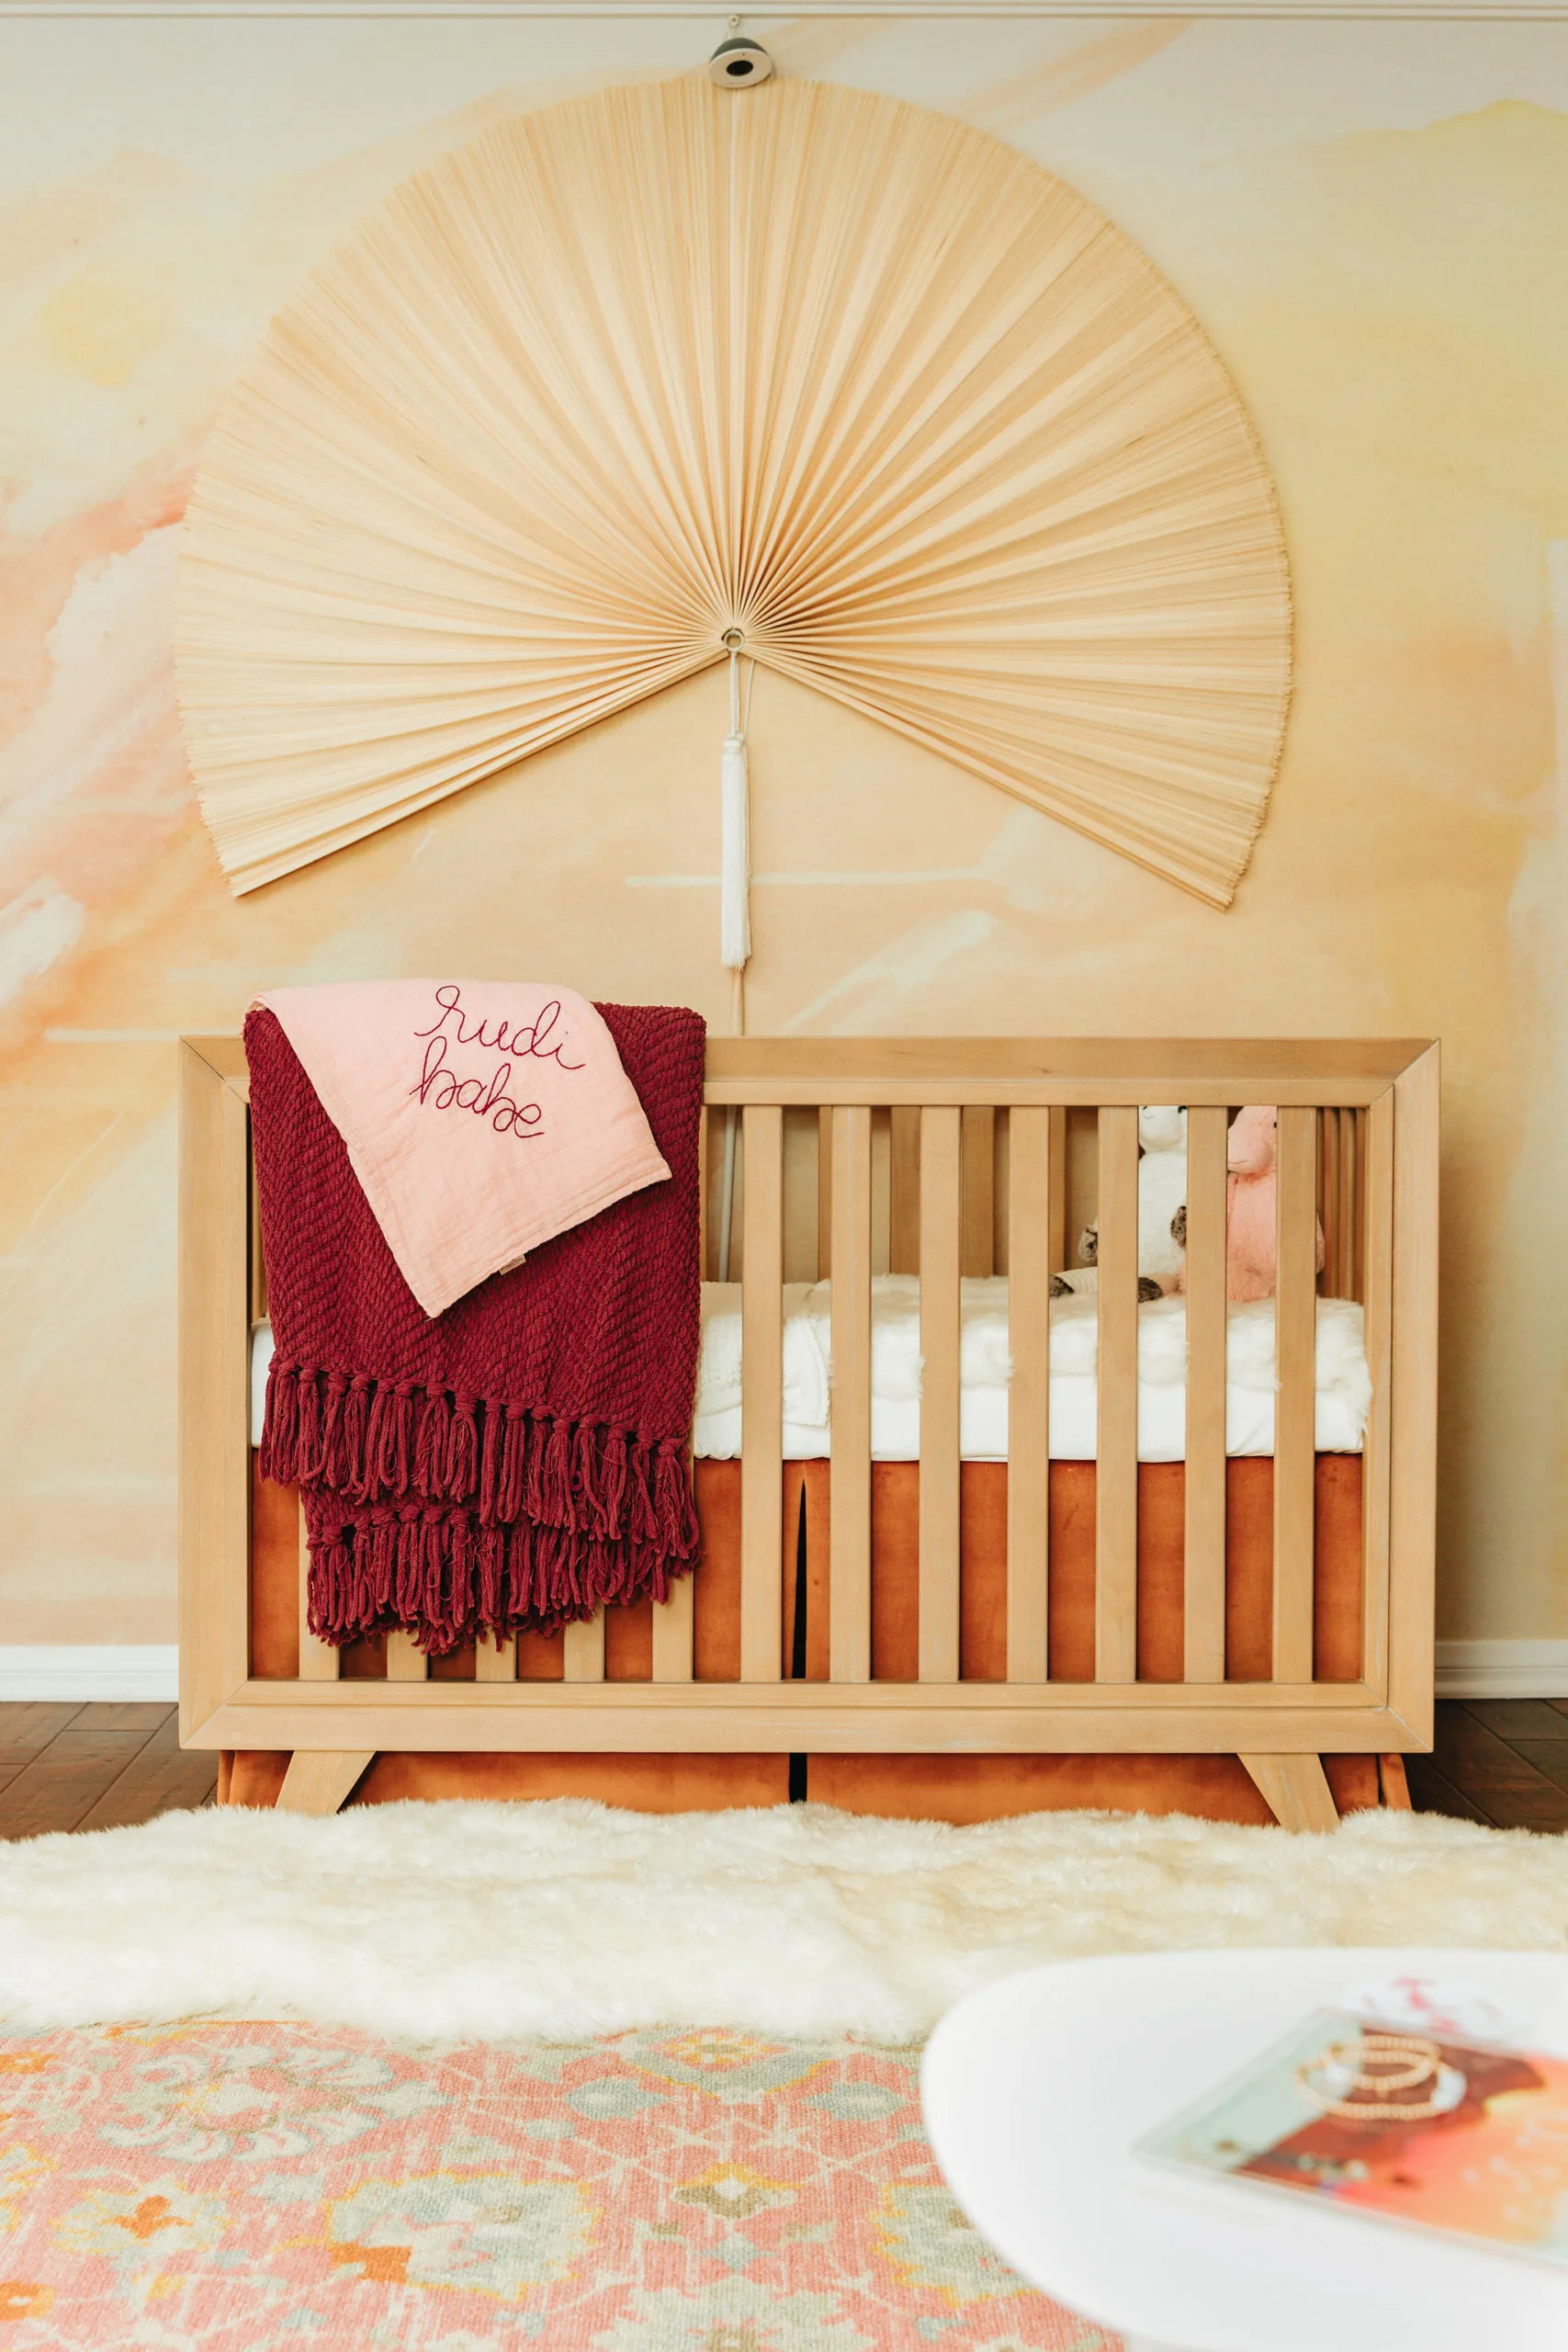 Fan Over Natural Wooster Crib with Abstract Sunrise Wallpaper